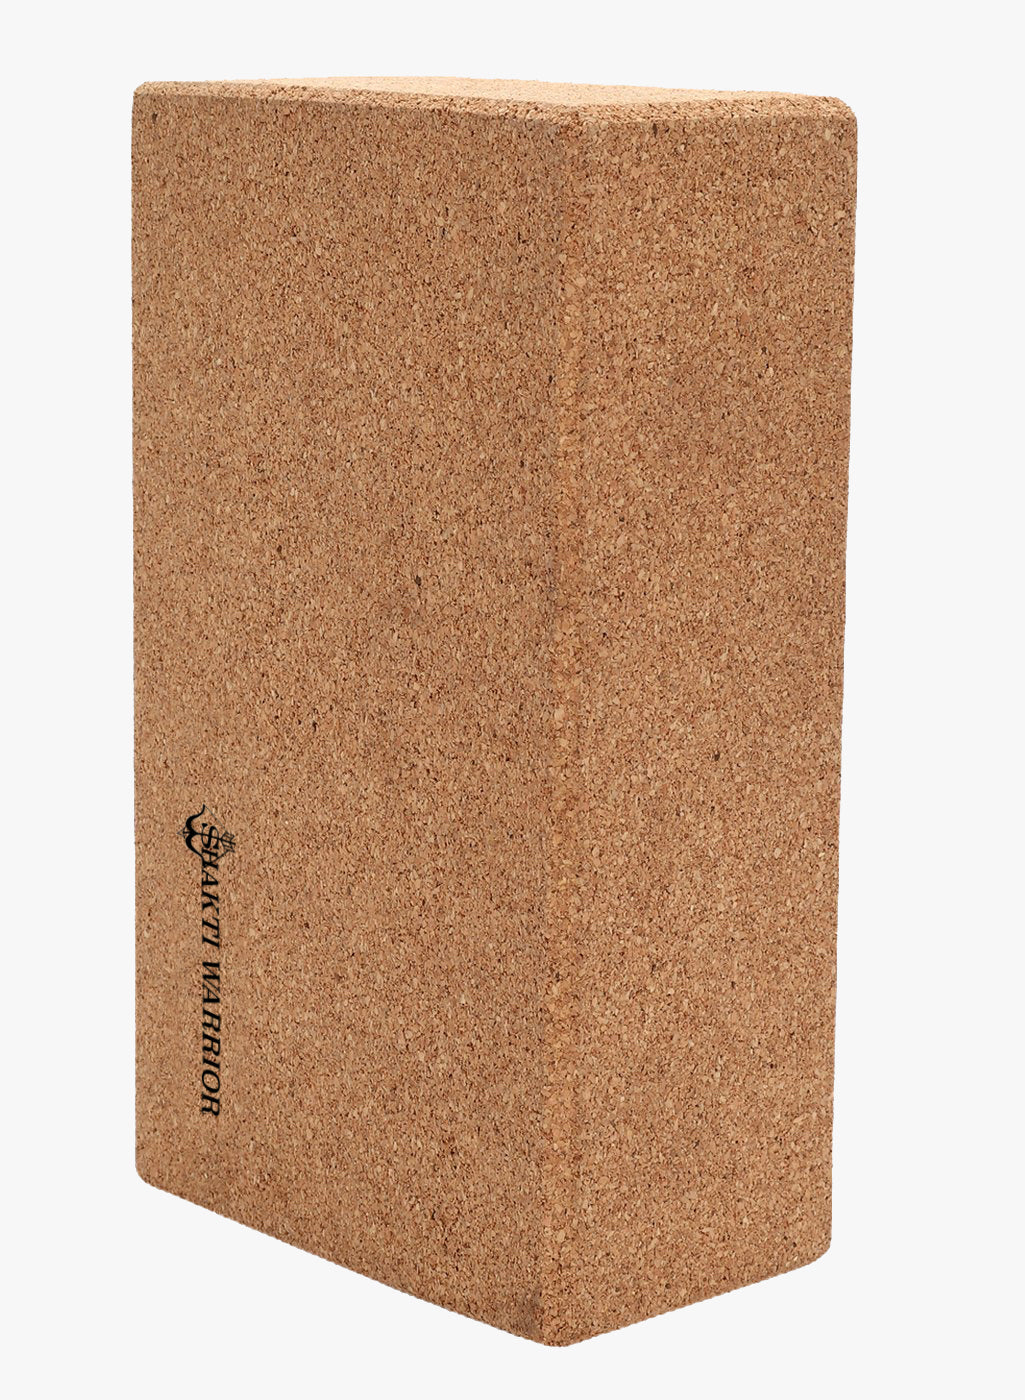 Balance Cork Yoga Block - Sustainable support for enhanced yoga poses. Comfortable, easy to grip, and perfect for yogis of all levels. Elevate your practice with this high-quality cork yoga prop